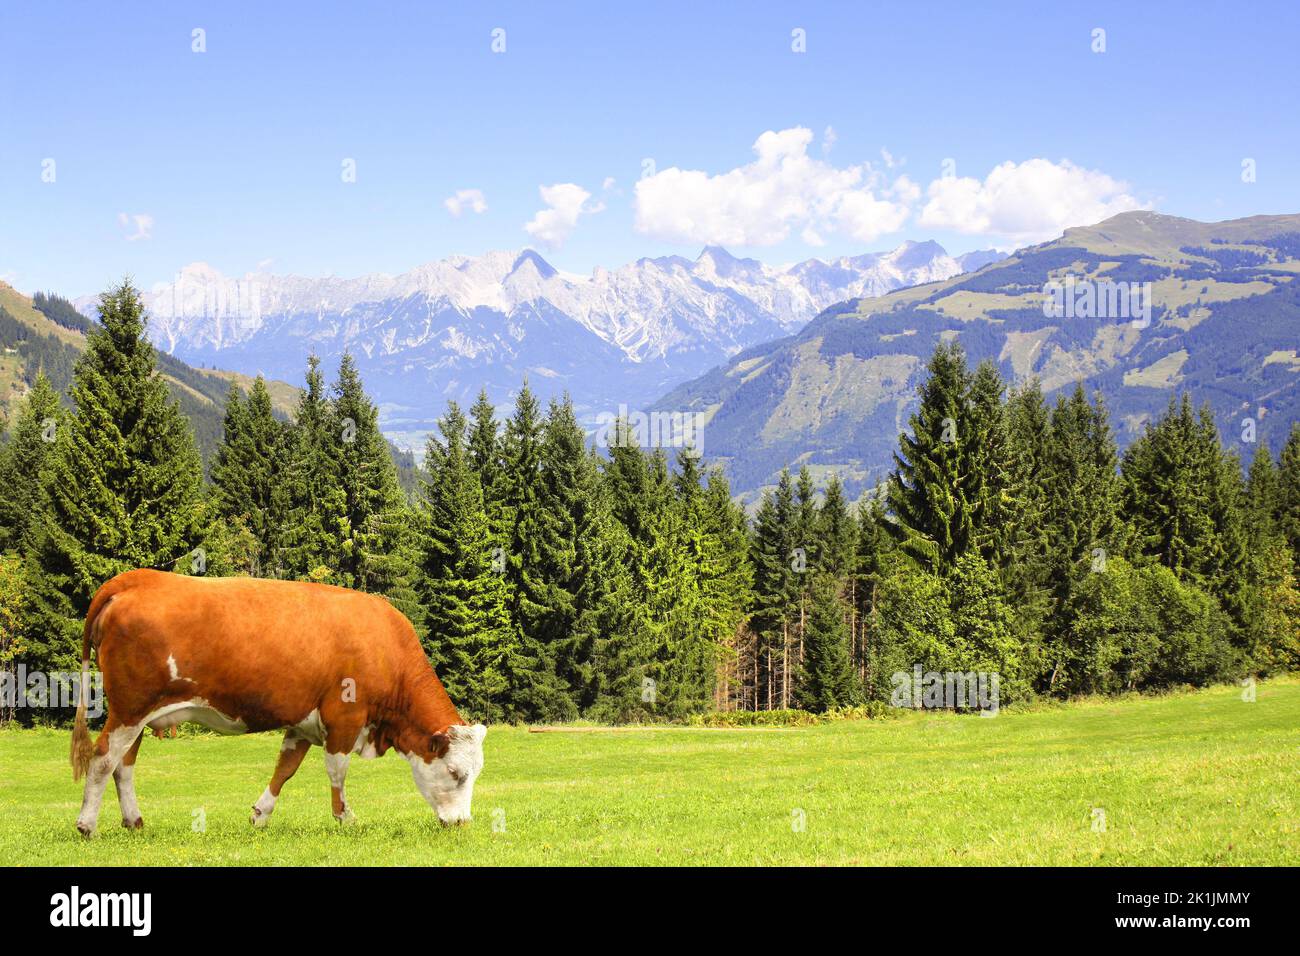 Cow grazing in a mountain meadow in Alps mountains, Tirol, Austria. View of idyllic mountain scenery in Alps with green grass and red cow on sunny day Stock Photo